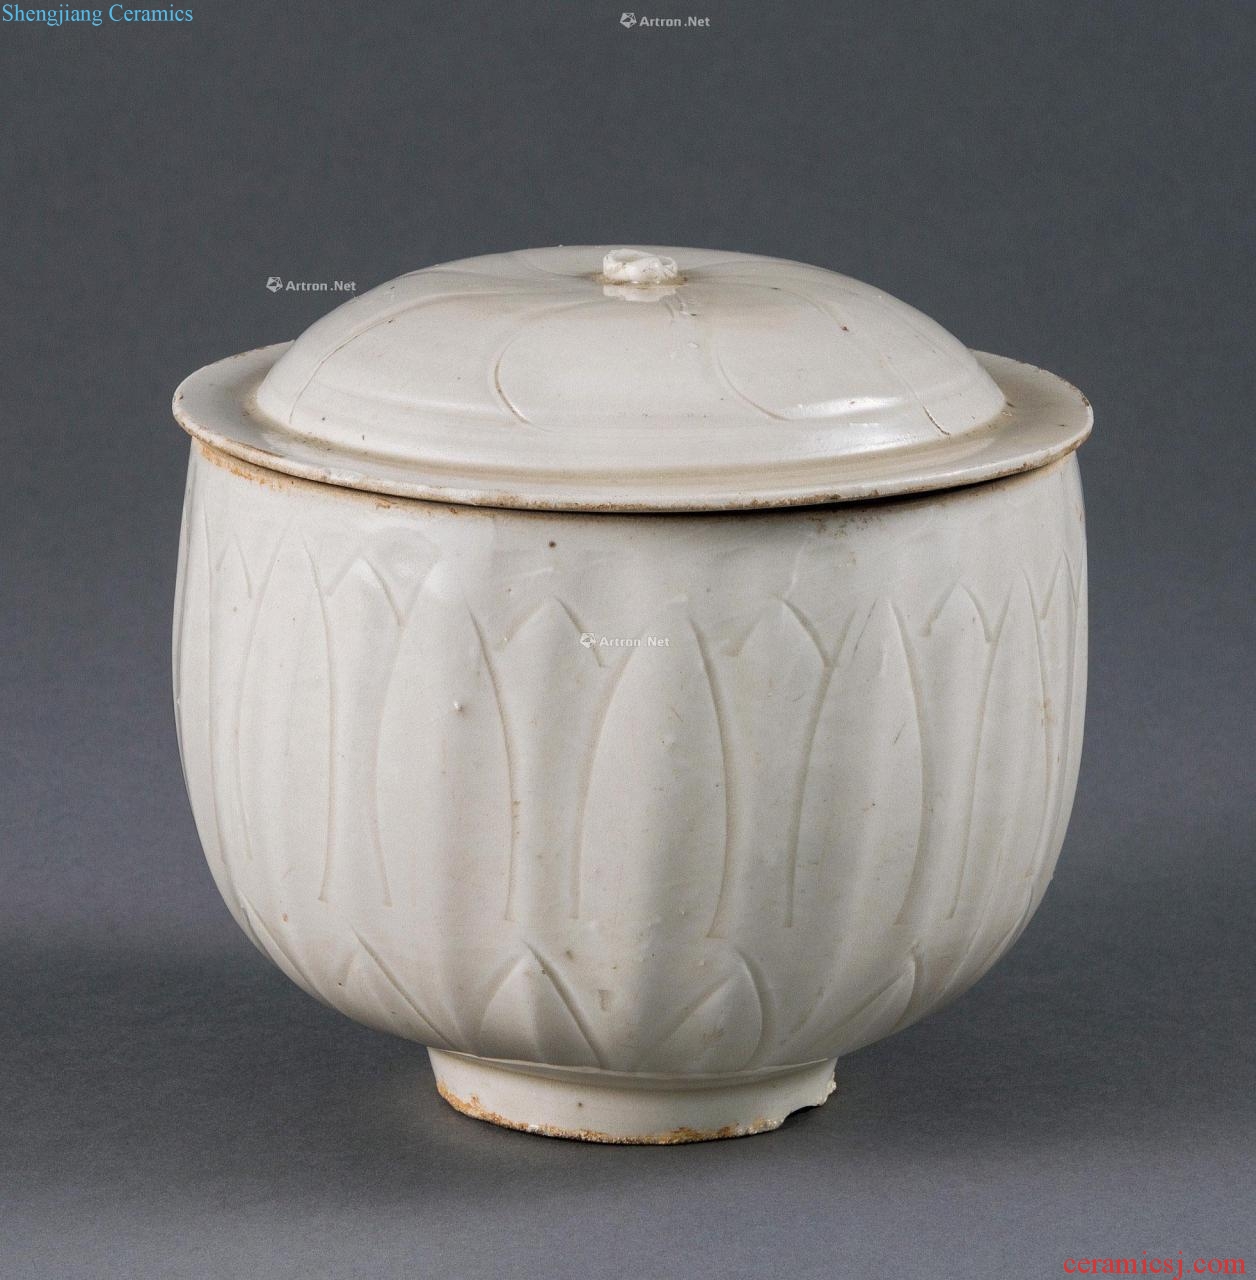 Northern song dynasty kiln is a lotus-shaped cover tank